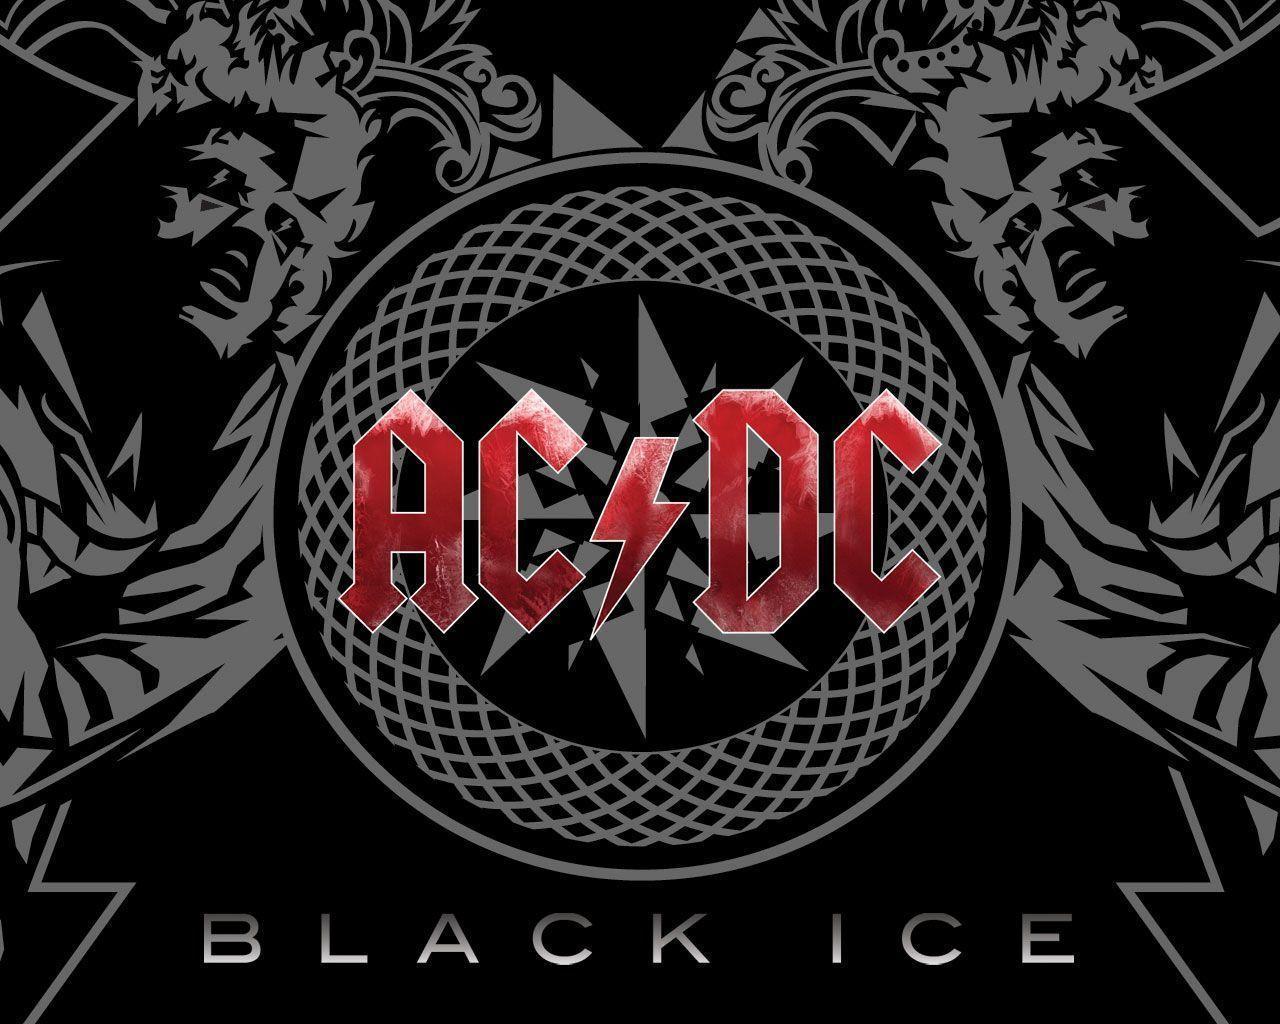 ACDC wallpaper by SirTMC  Download on ZEDGE  62fb